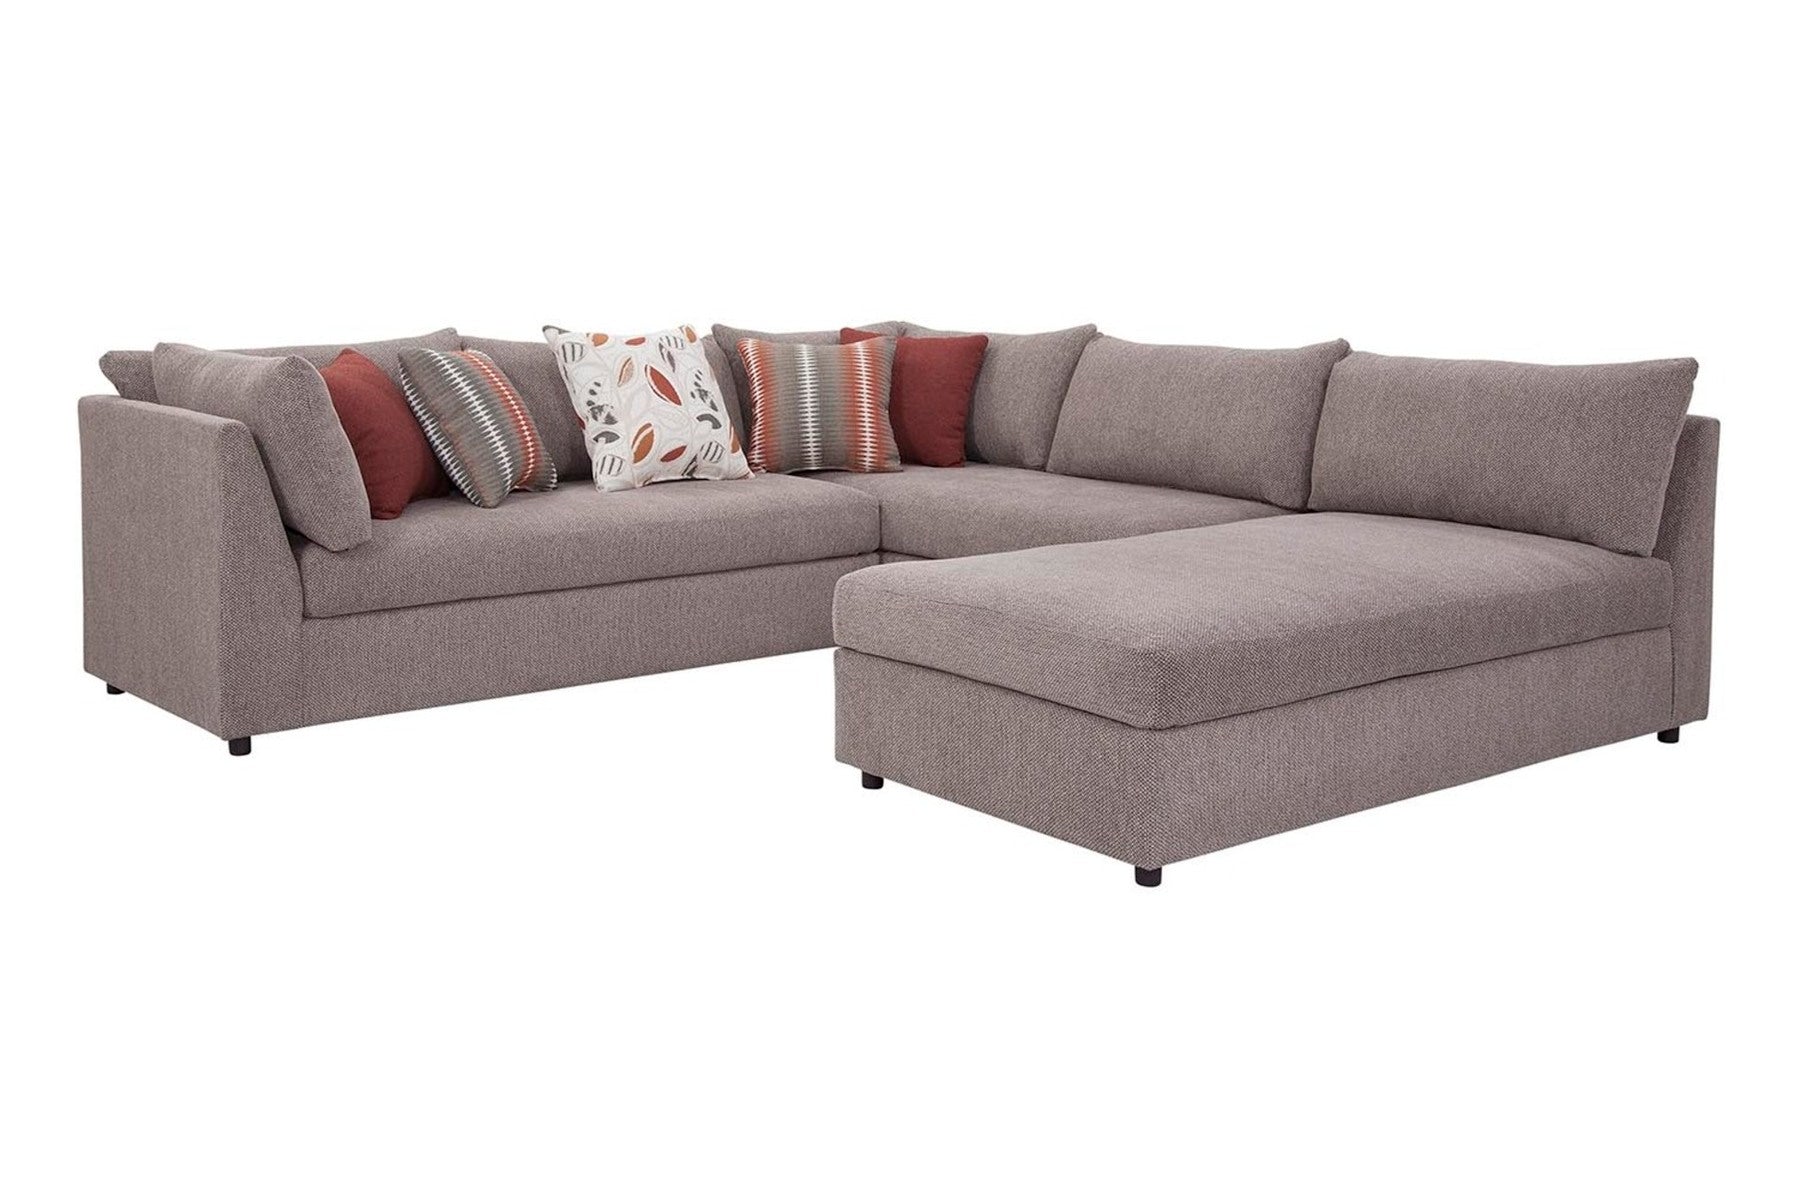 A322d 3 Piece Sectional Couch Neutral